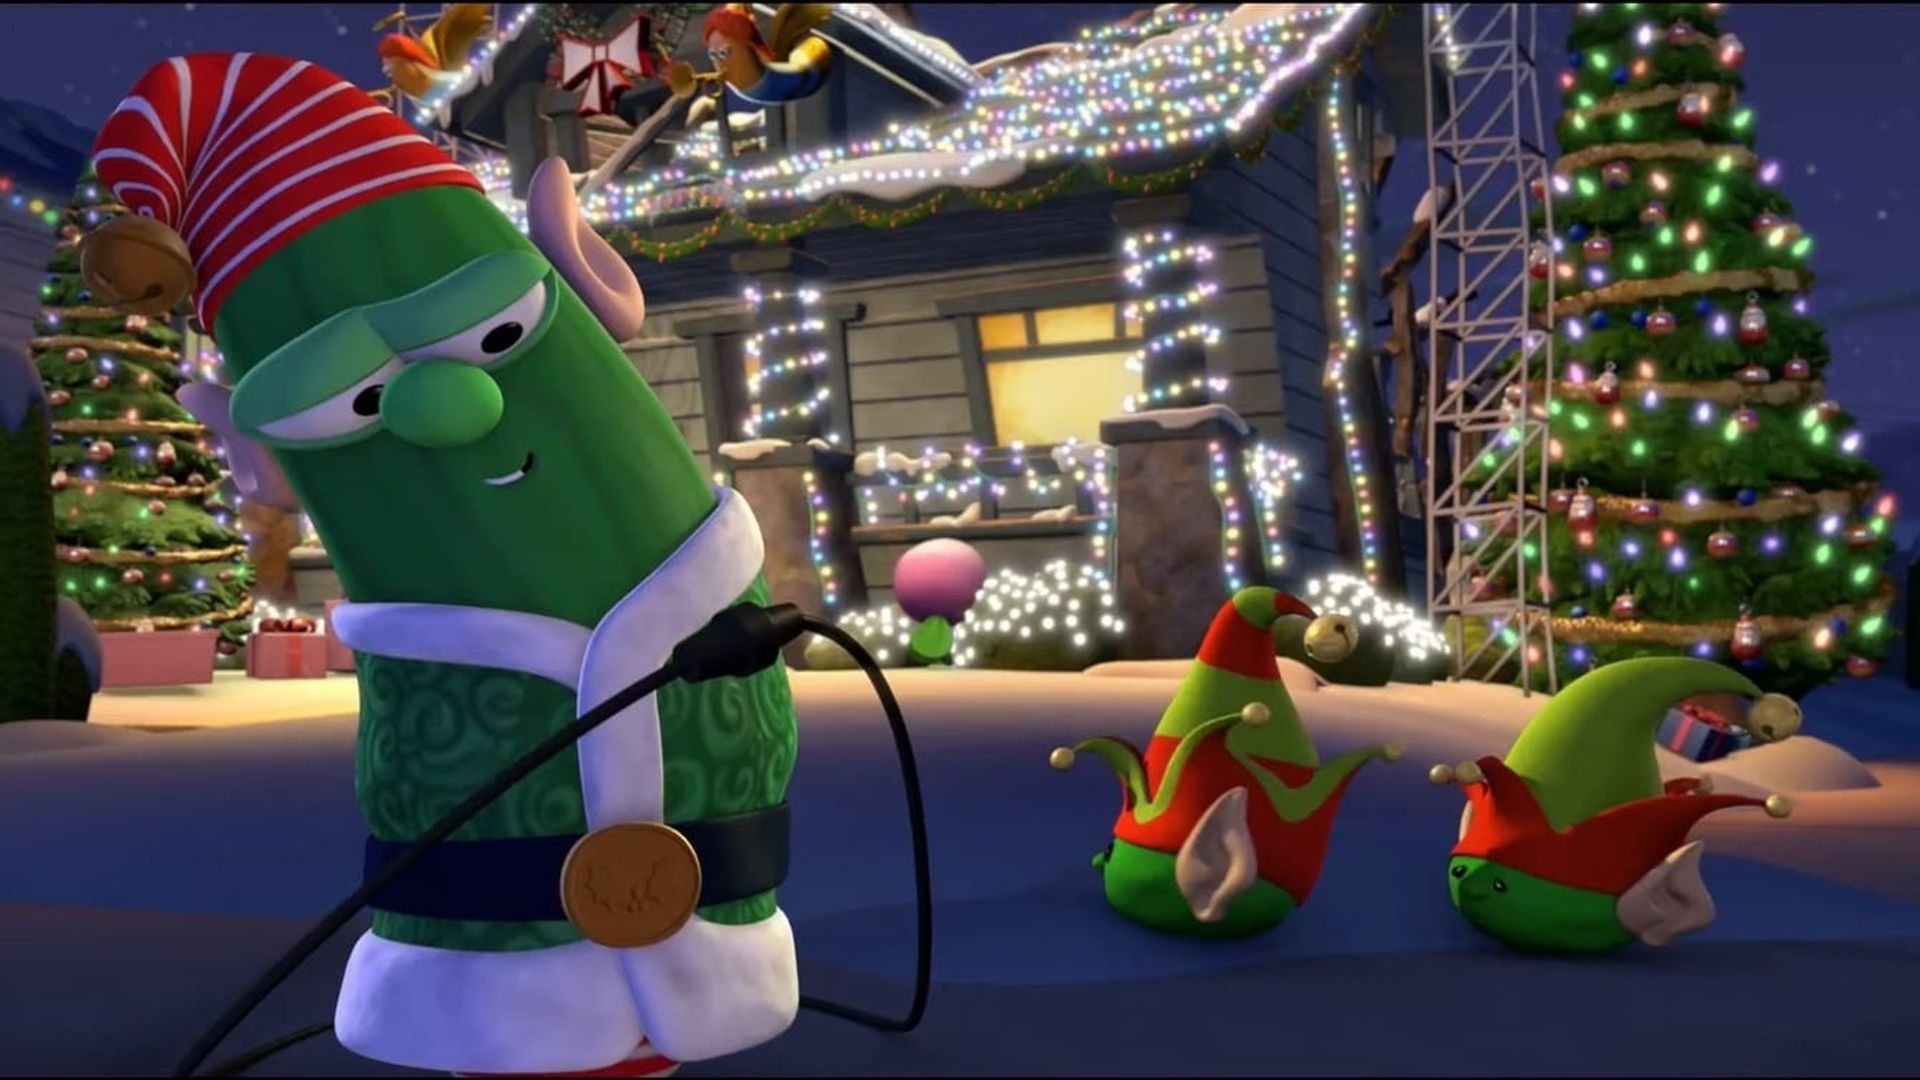 VeggieTales: Merry Larry and the True Light of Christmas background